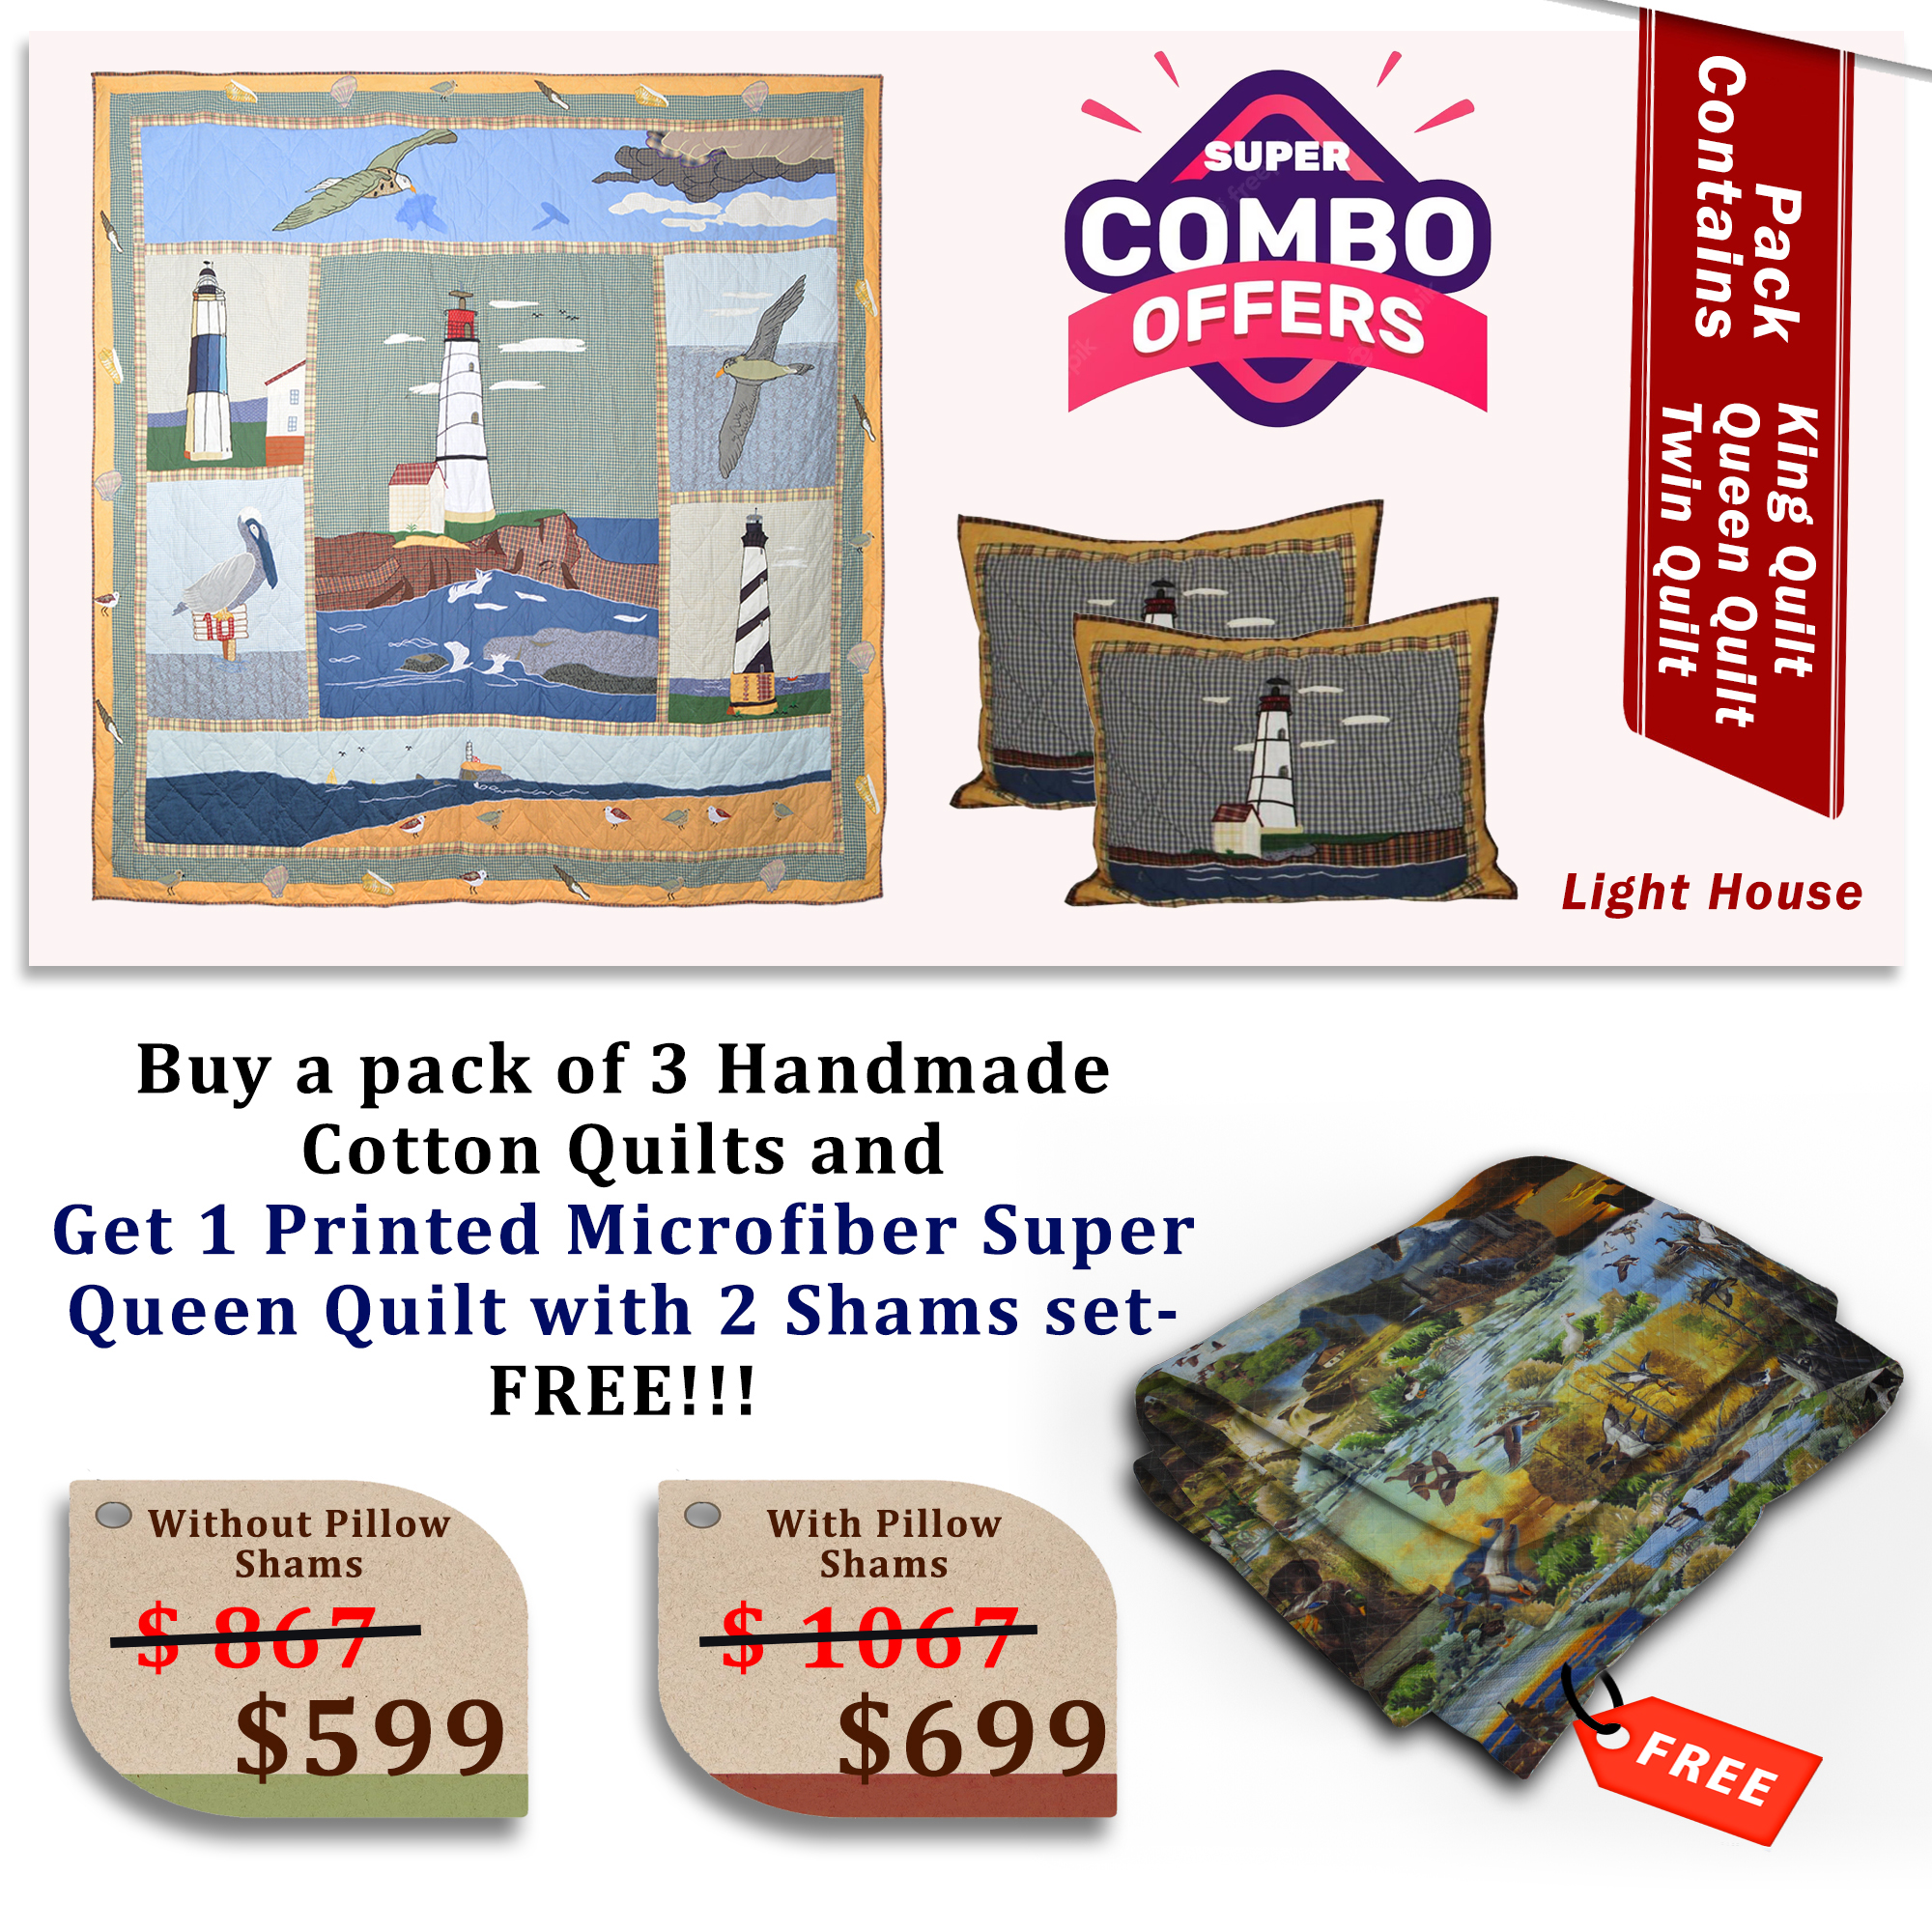 Light House - Handmade Cotton quilts  | Buy 3 cotton quilts and get 1 Printed Microfiber Super Queen Quilt with 2 Shams set FREE